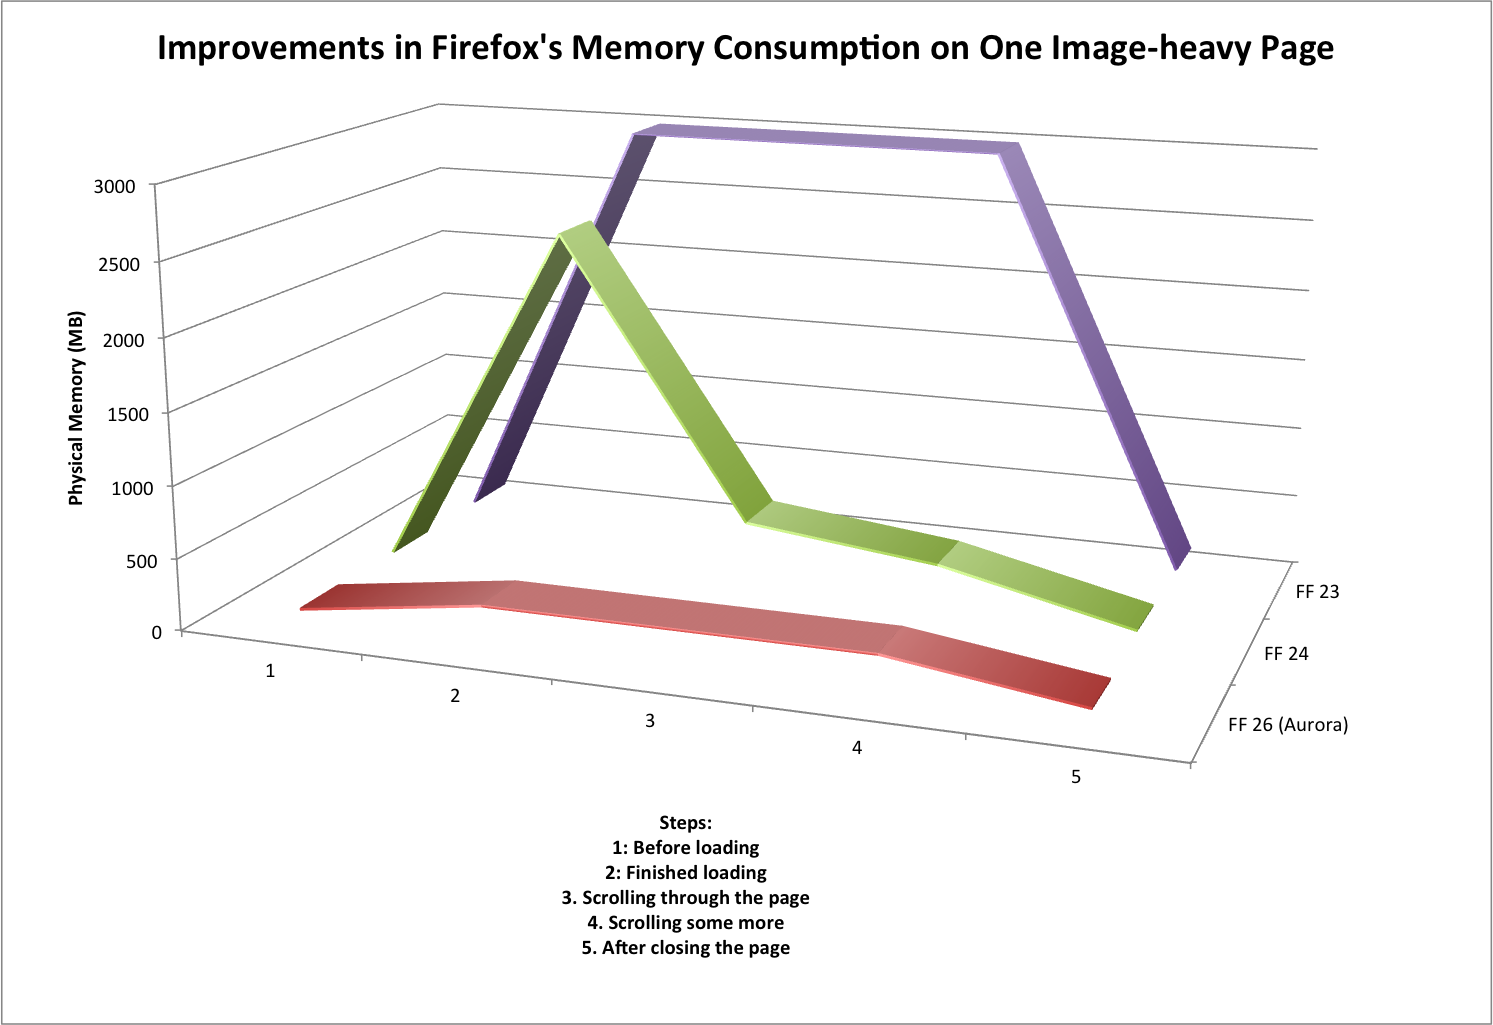 Improvements in Firefox's Memory Consumption on One Image-heavy Page